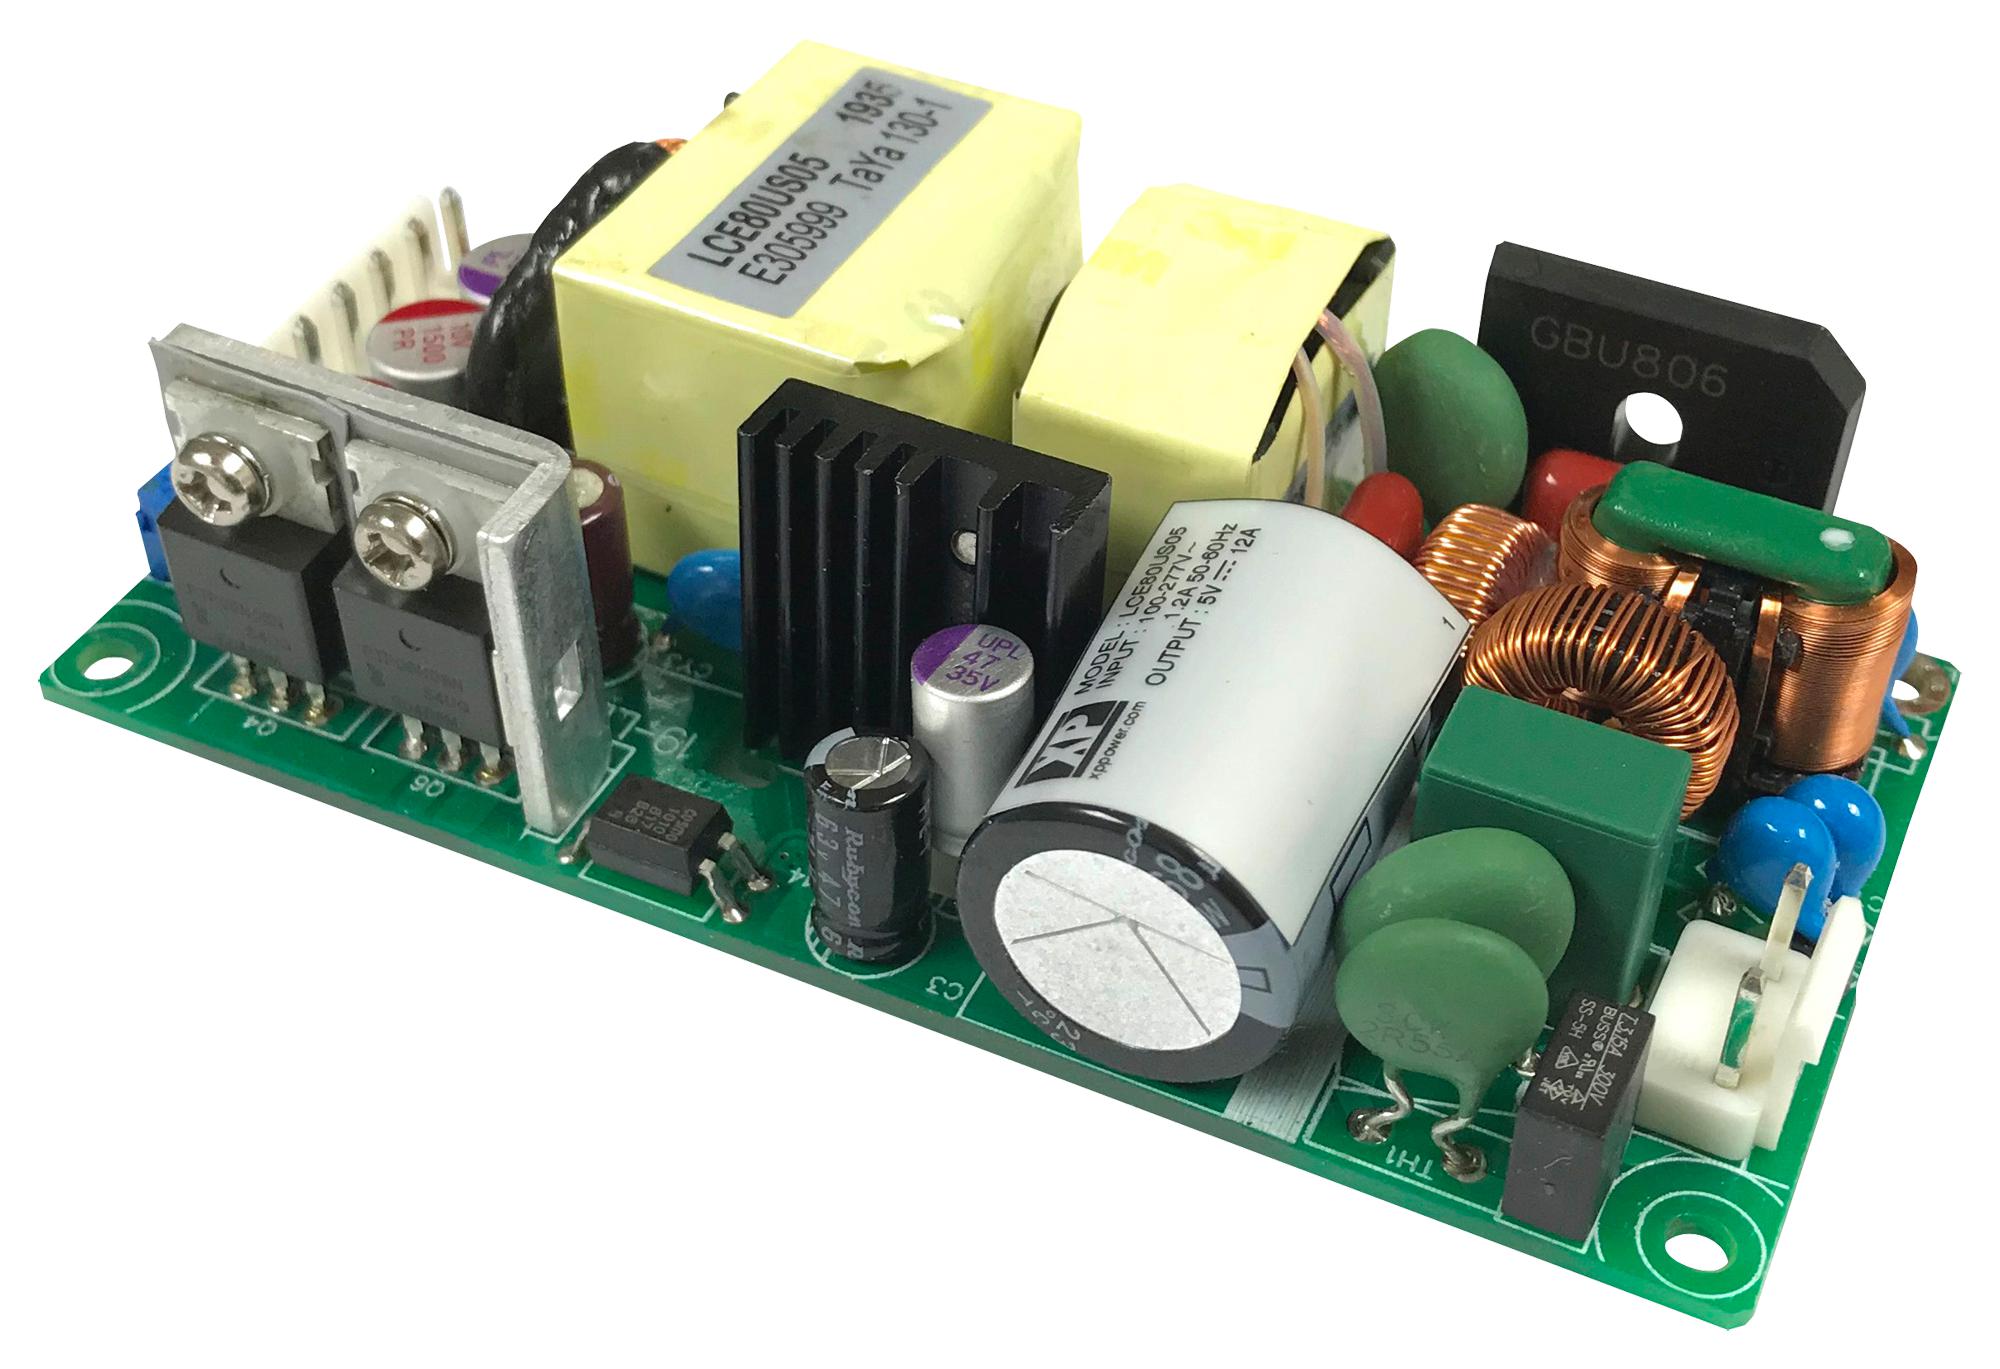 LCE80PS48 POWER SUPPLY, AC-DC, 48V, 1.67A XP POWER